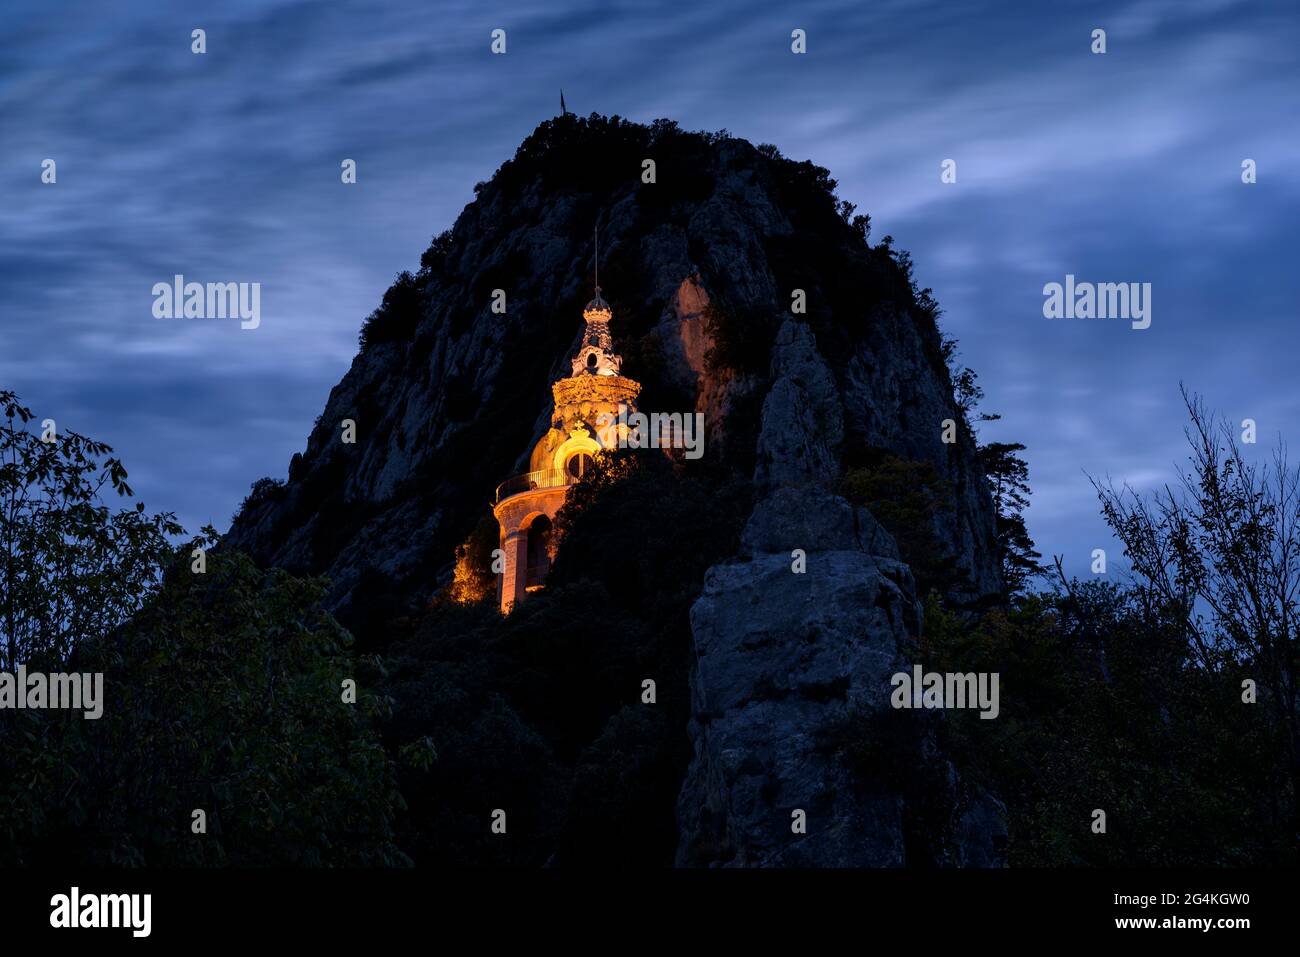 Troballa Cave (finding cave where was found the virgin) in the Queralt Sanctuary in the twilight blue hour (Berguedà, Barcelona, Catalonia, Spain) Stock Photo